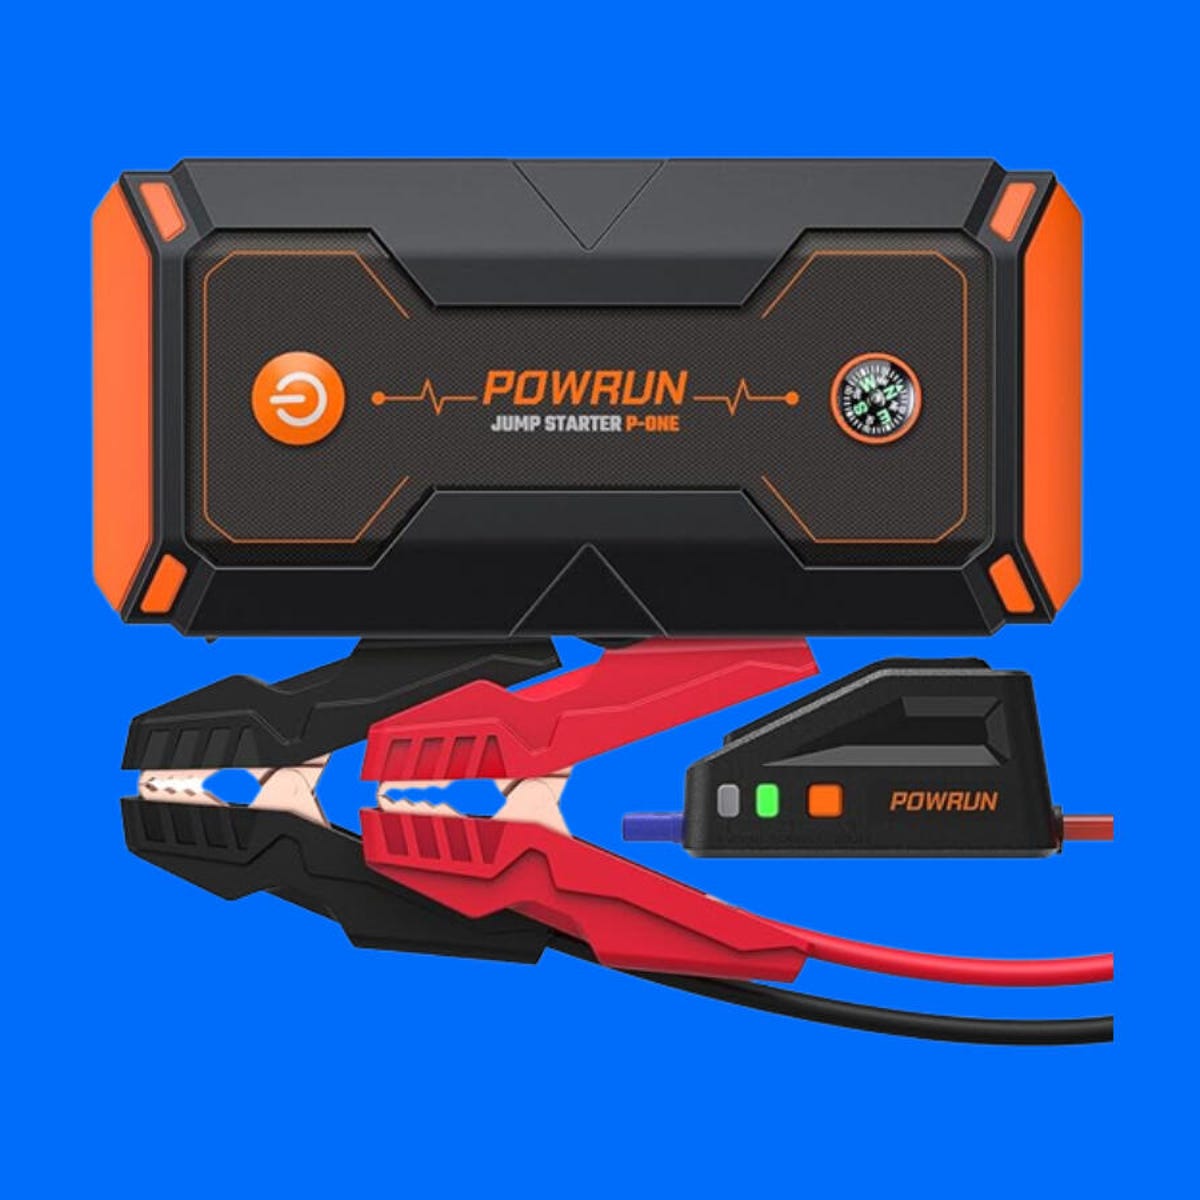 The Portable Car Jump Starter Battery Pack I Swear by Is 40% Off